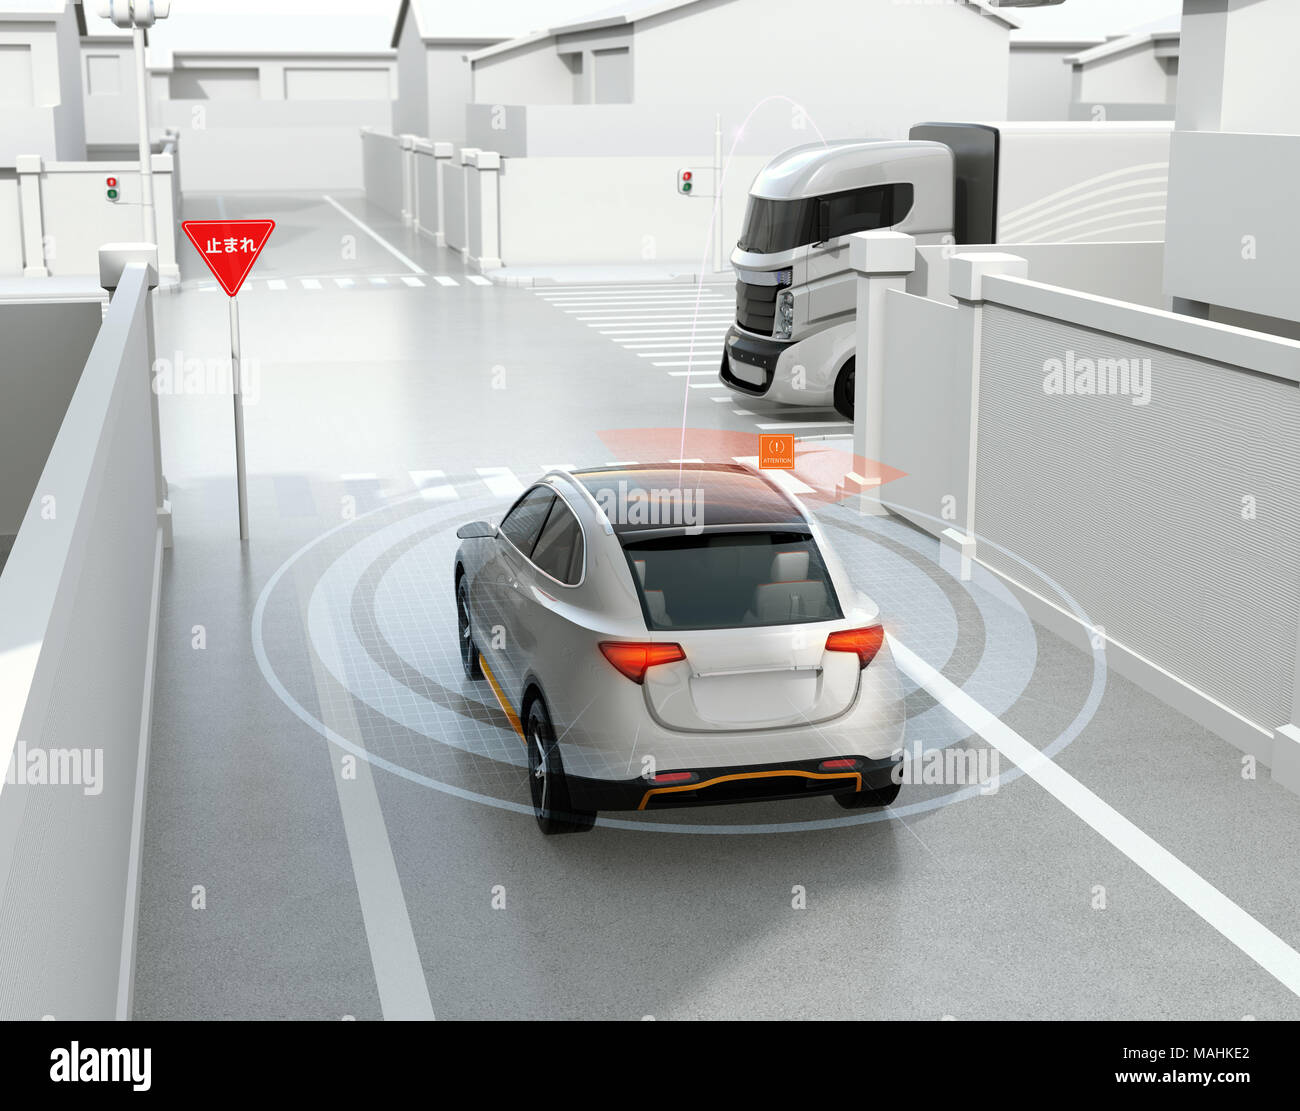 Rear view of white SUV in one-way street detected vehicle in the blind spot. Stop sign in Japanese.  left-hand traffic region. Connected car concept. Stock Photo